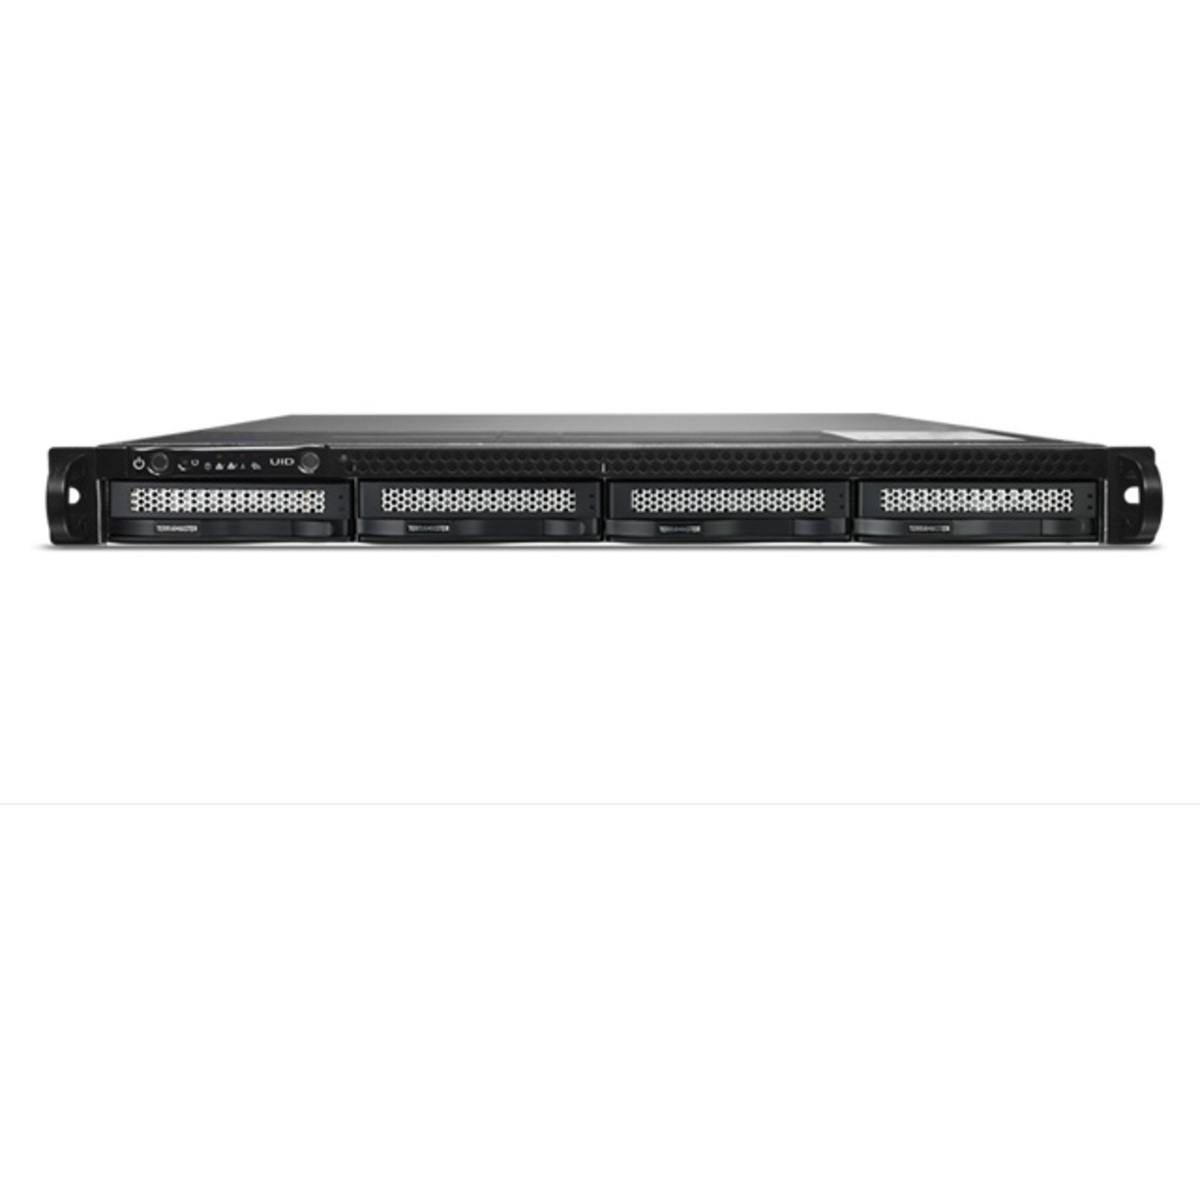 TerraMaster U4-111 64tb 4-Bay RackMount Multimedia / Power User / Business NAS - Network Attached Storage Device 4x16tb Seagate EXOS X18 ST16000NM000J 3.5 7200rpm SATA 6Gb/s HDD ENTERPRISE Class Drives Installed - Burn-In Tested U4-111